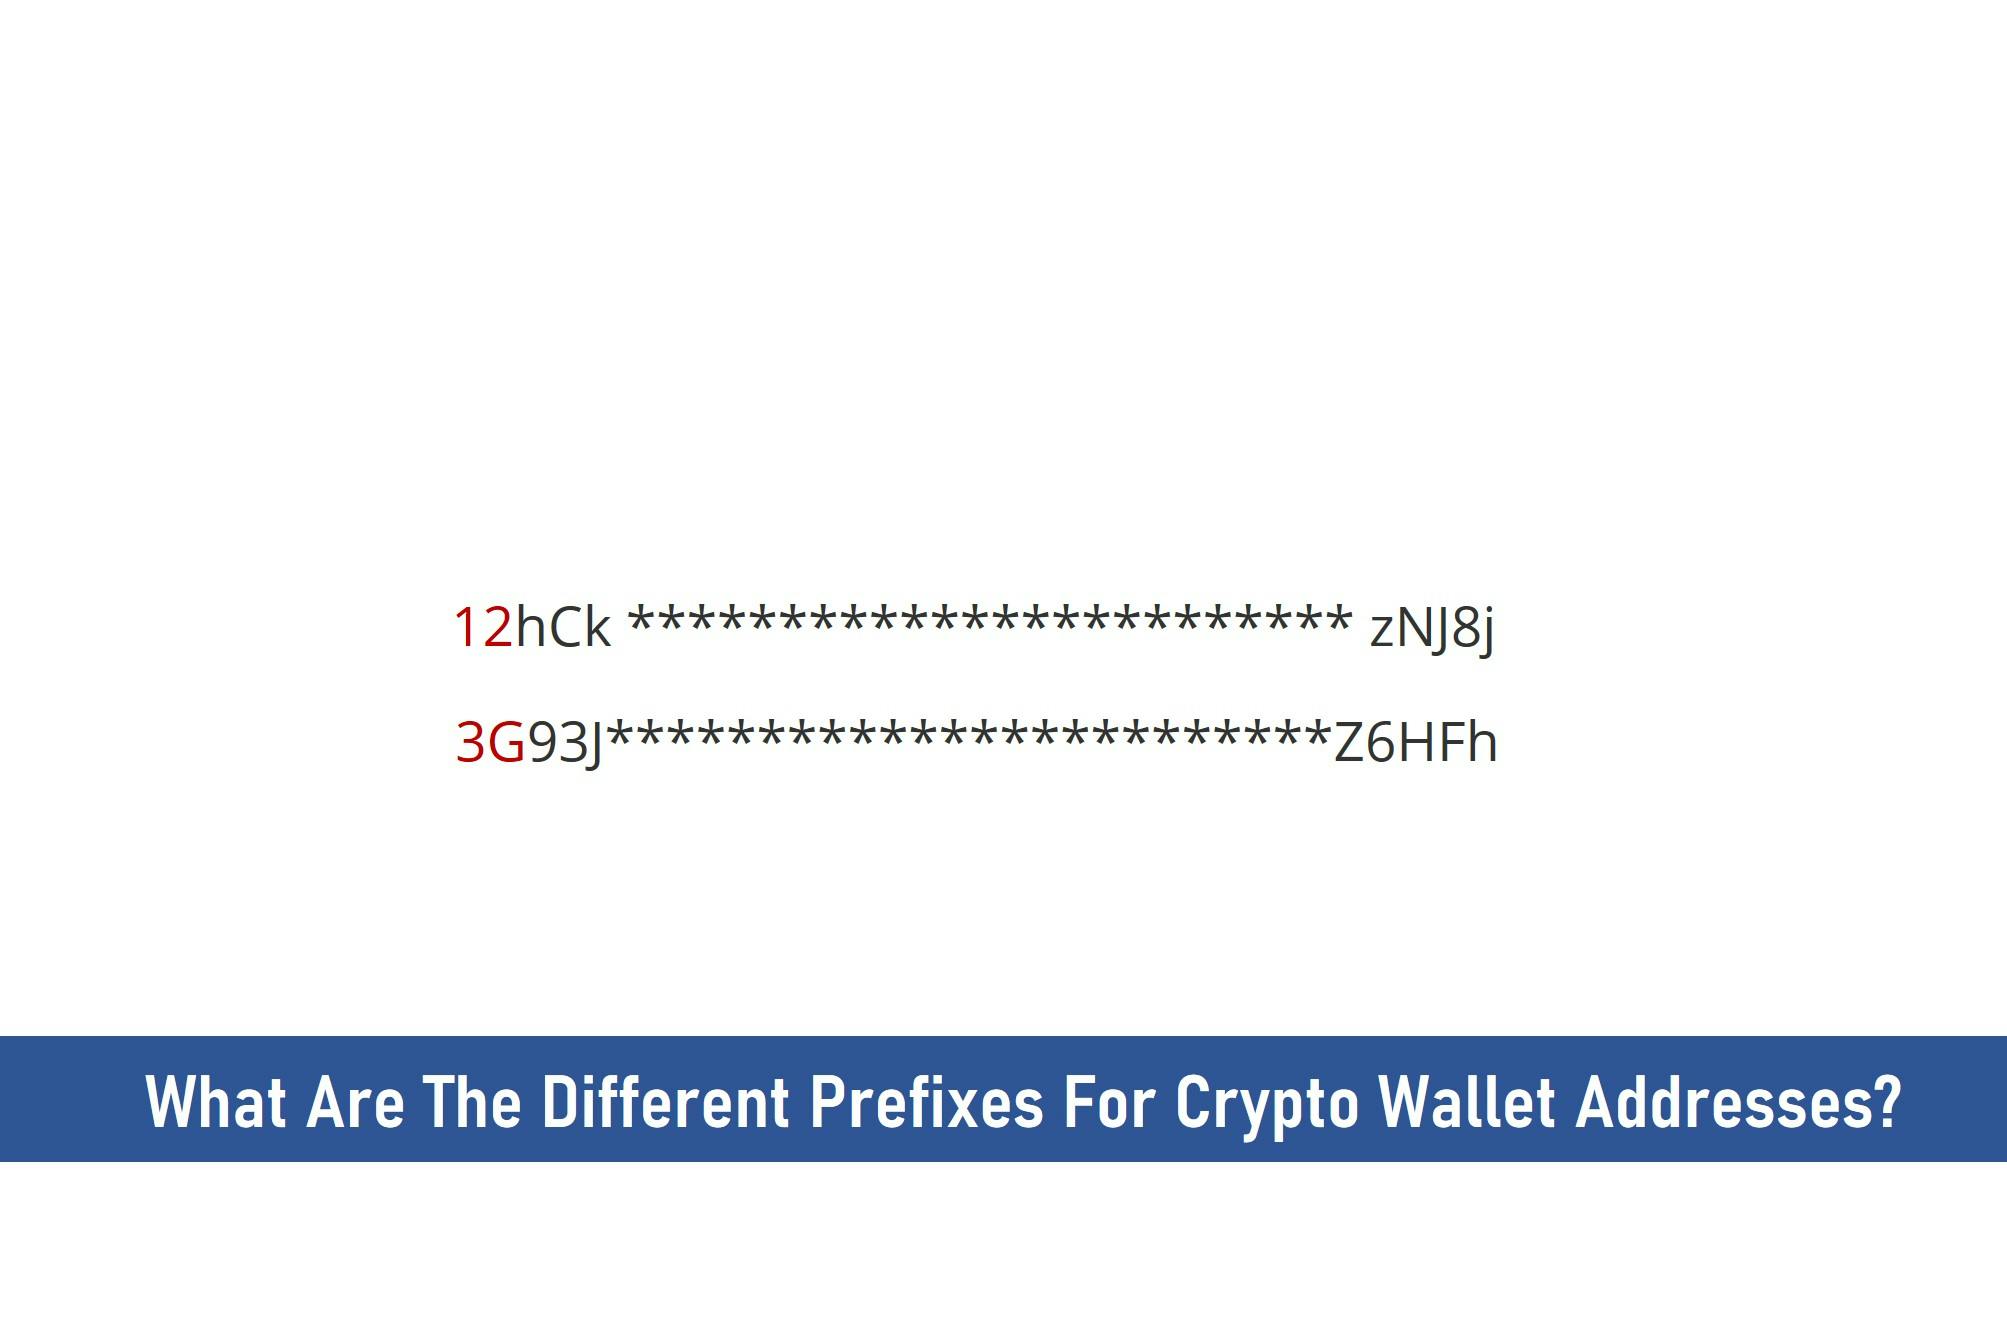 What Are The Different Prefixes For Crypto Wallet Addresses?